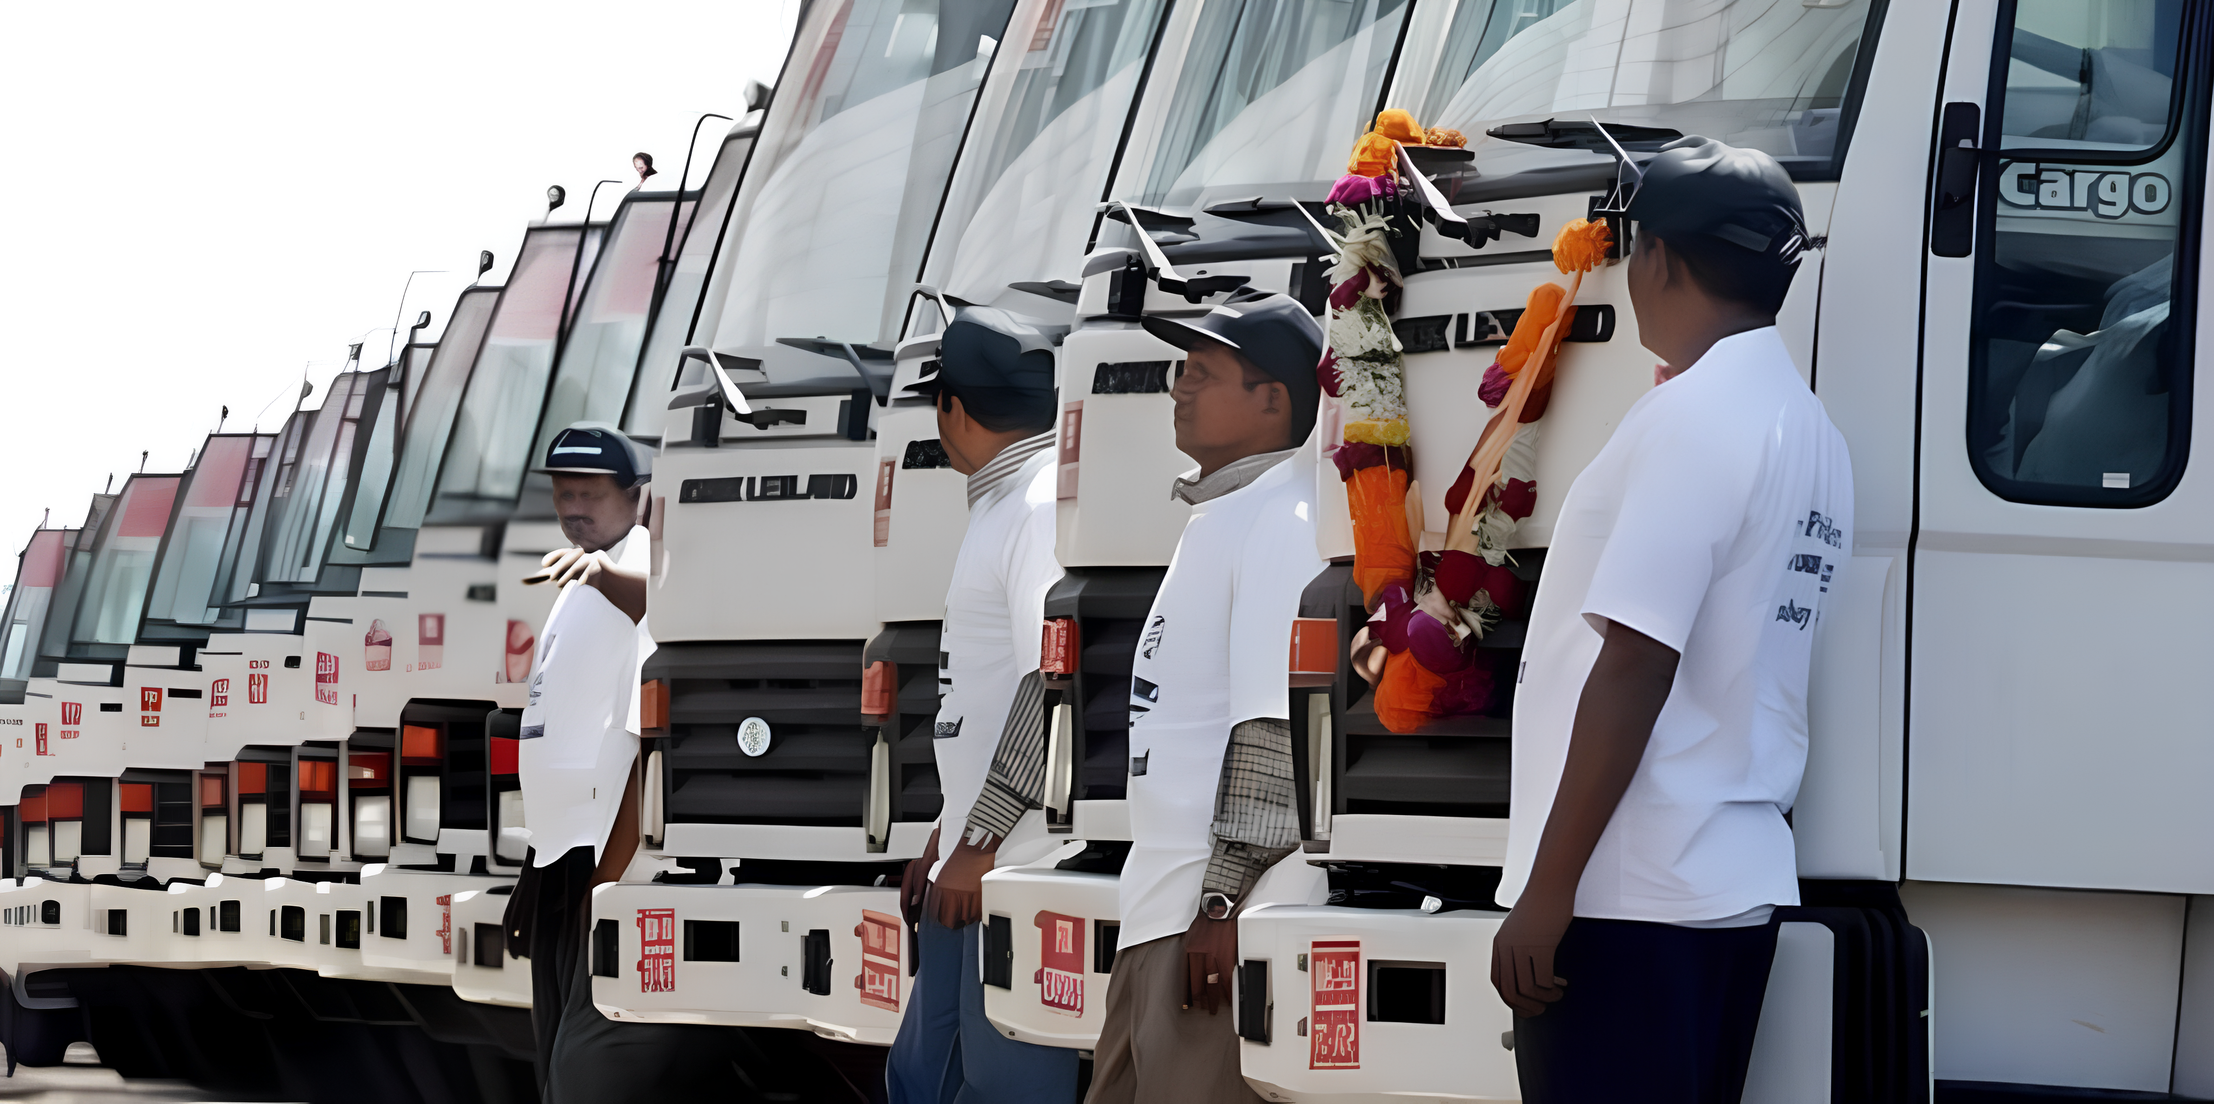 <p>Ashok Leyland is India’s largest bus manufacturer and the 4th largest in the world. This order represents another step towards solidifying its position of leadership, the company said</p>